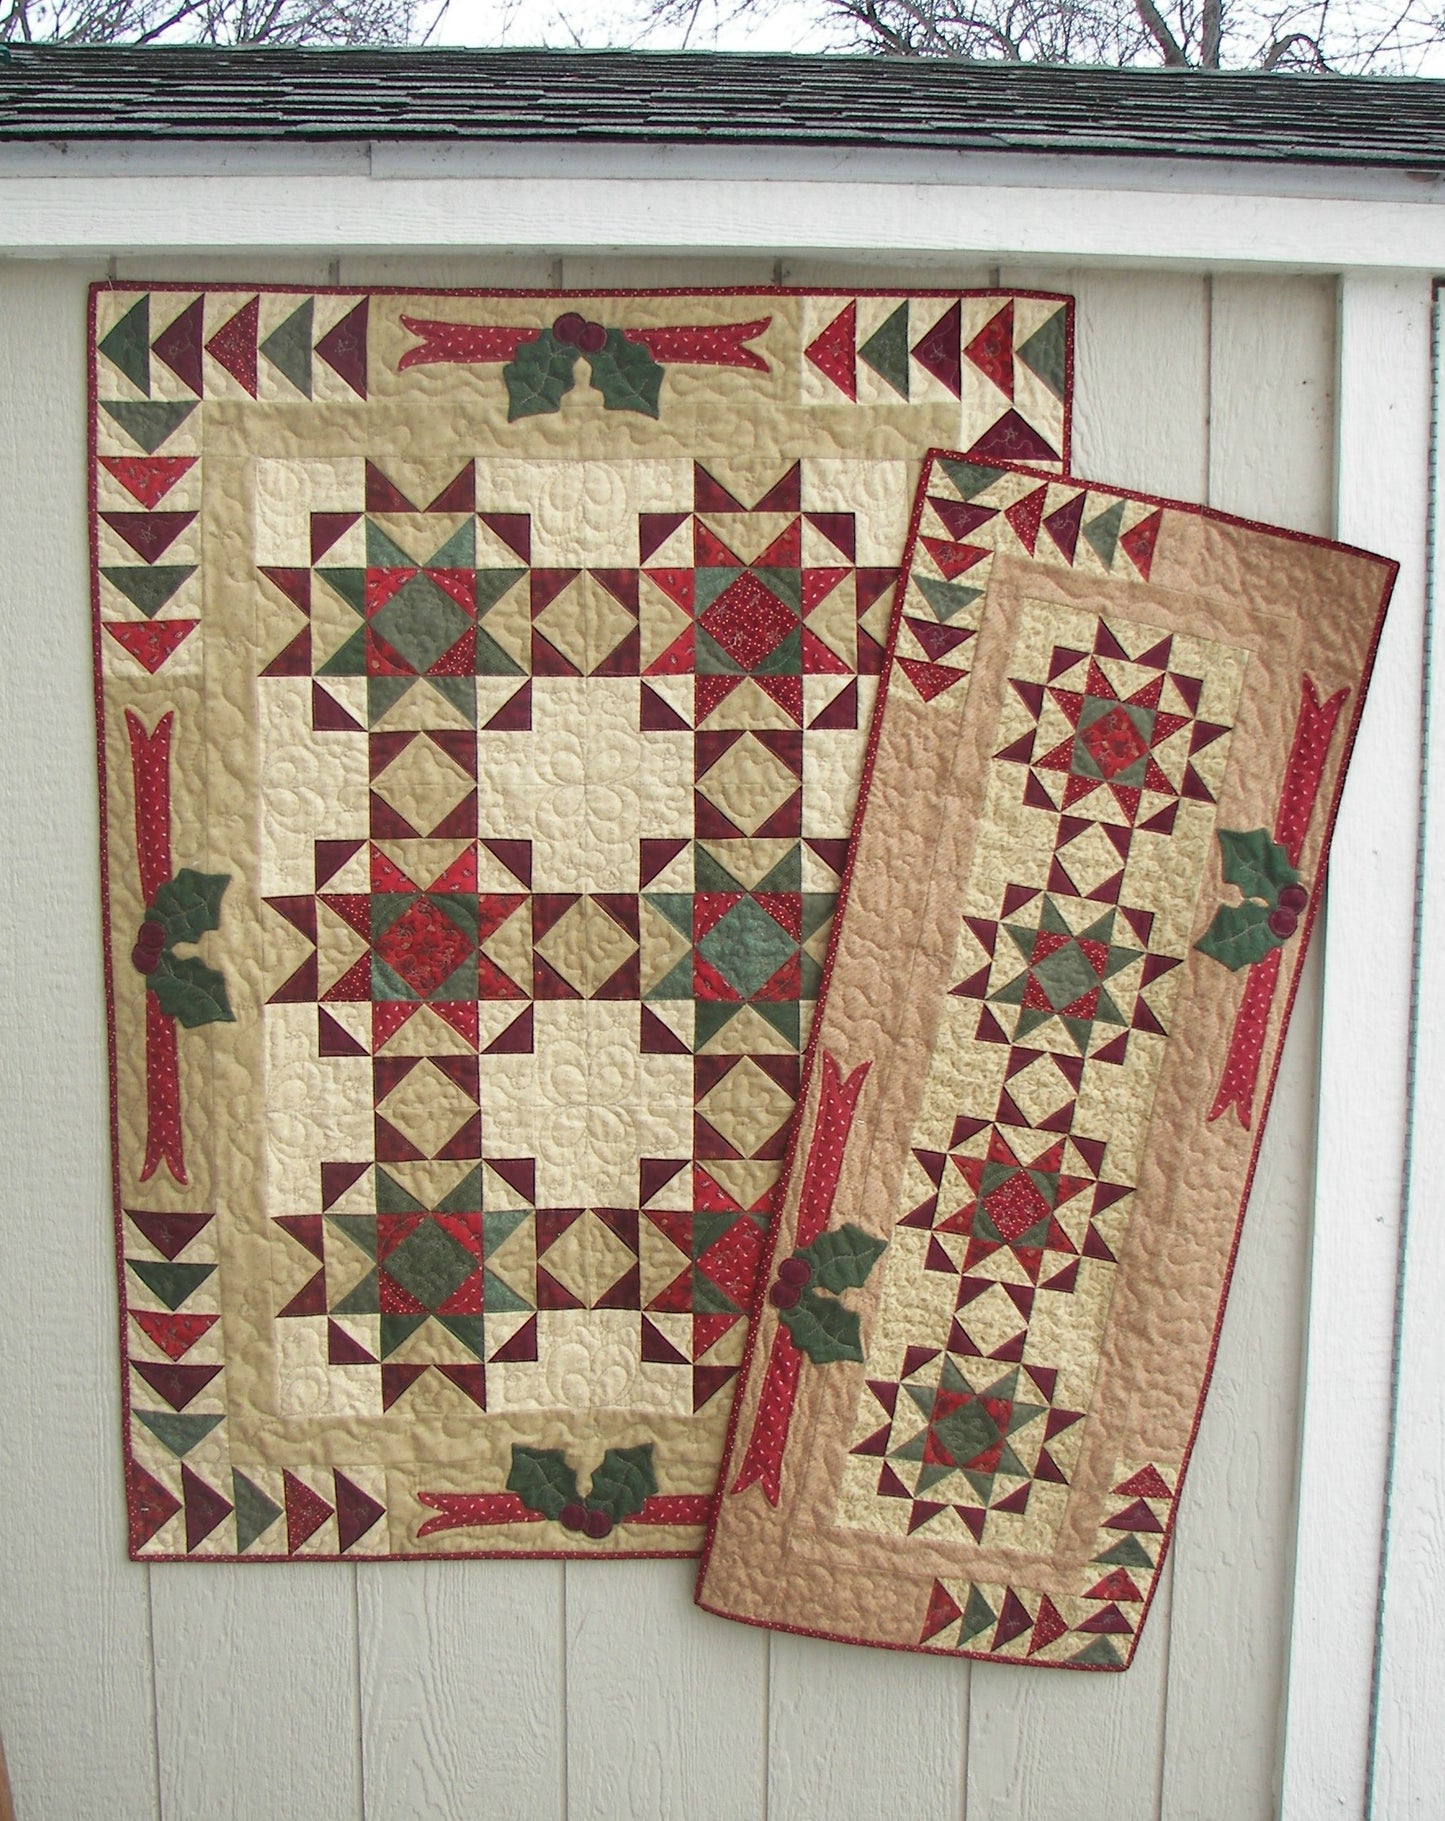 Christmas Wishes Quilt Pattern